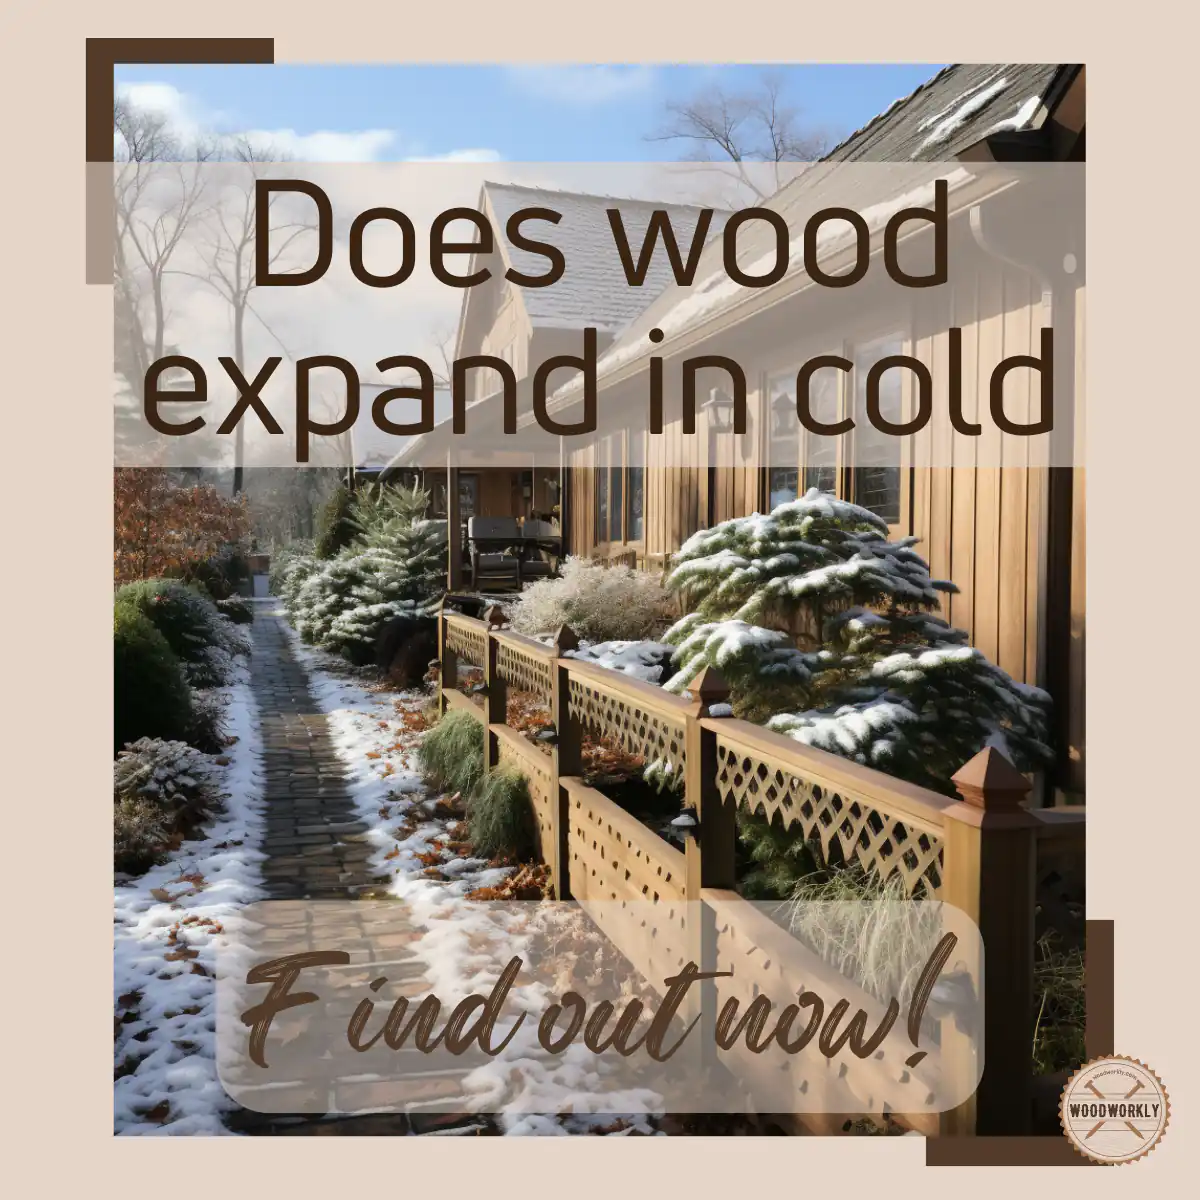 Does wood expand in cold